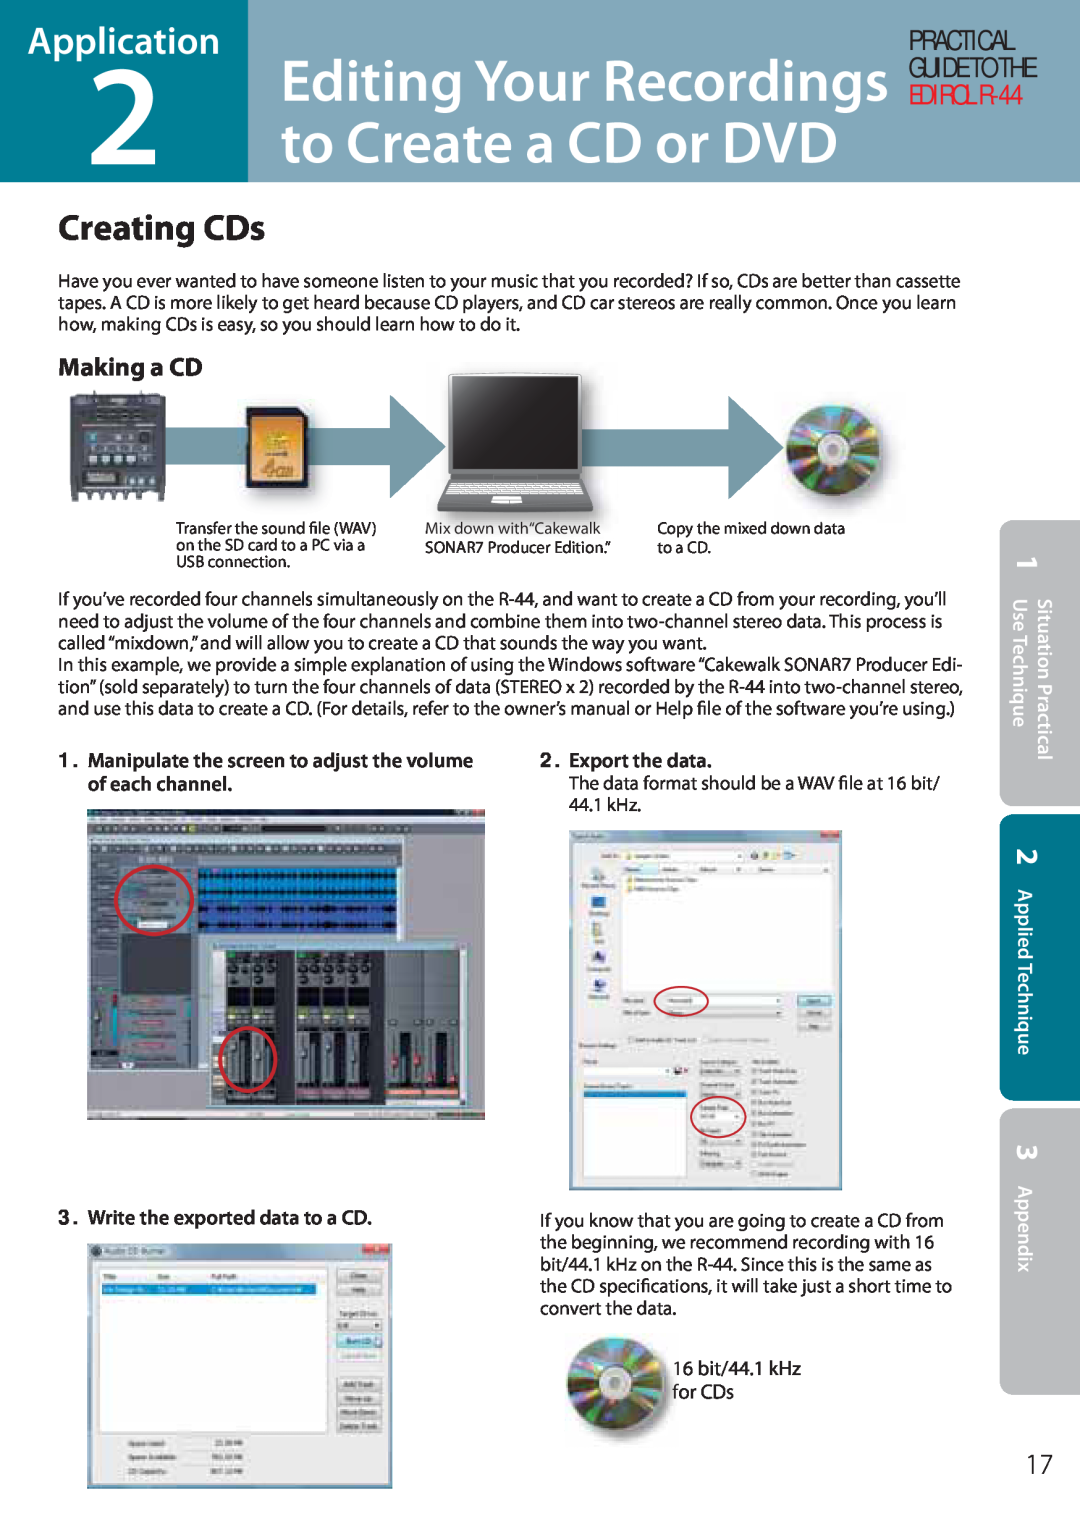 Edirol R-44 Editing Your Recordings to Create a CD or DVD, Creating CDs, Export the data, of each channel, Application 